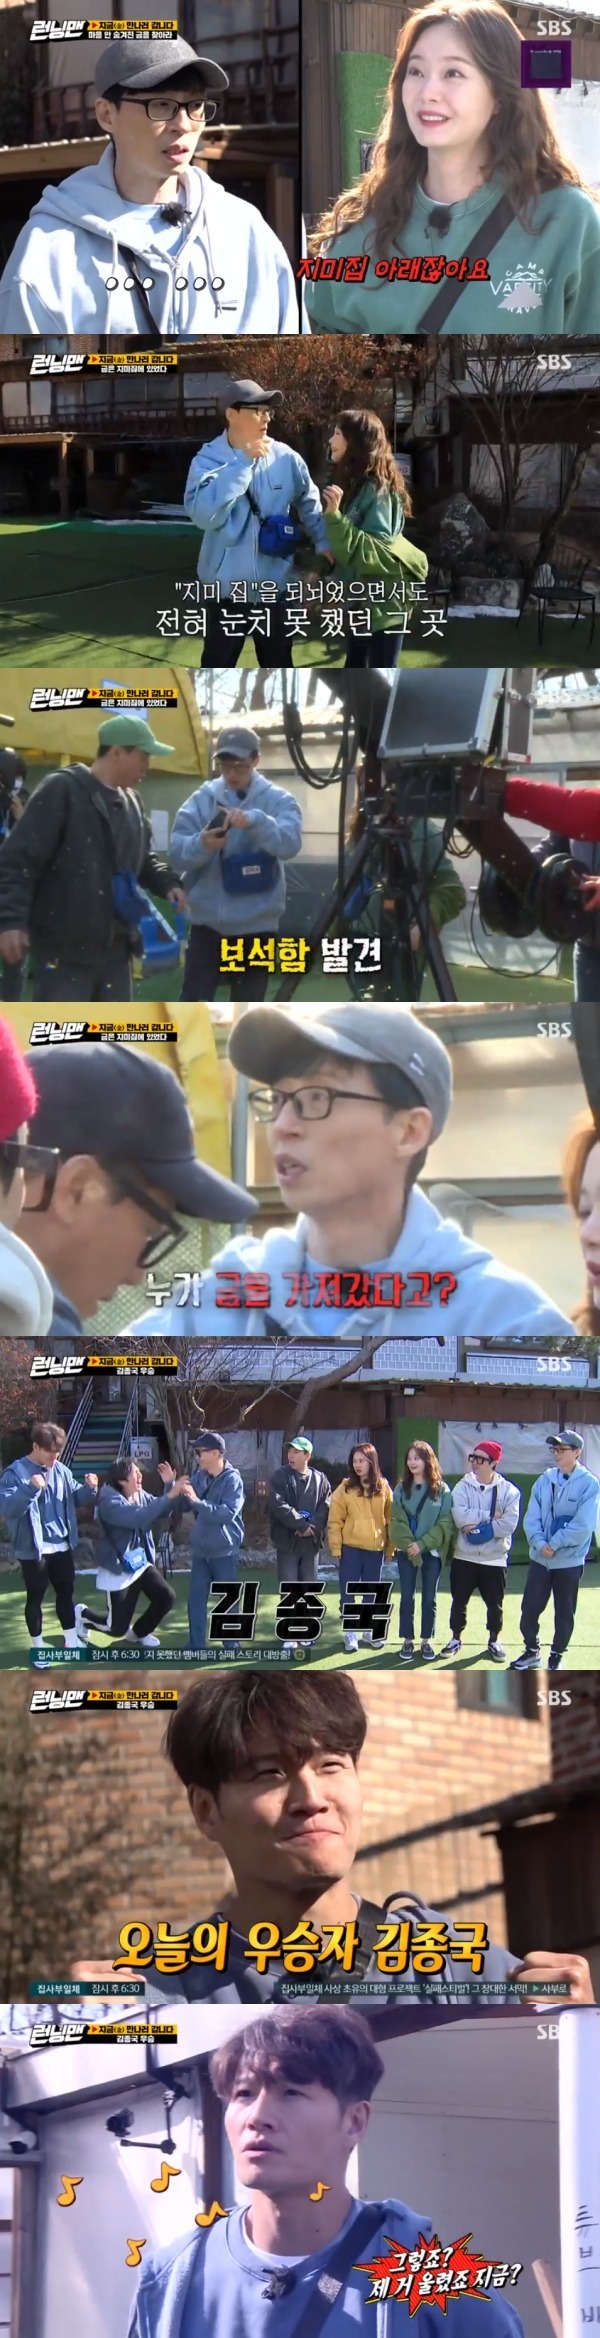 Seoul) = Kim Jong-guk won the race with his extraordinary reasoning and observational power.On SBS Running Man broadcasted on the 7th, a race was held to find the hidden gold in the village.Ji Seok-jin recruited Kim Jong-guk and Lee Kwang-soo, who sighed when his name was called, and Lee Kwang-soo frowned. Ji Seok-jin shared the special Hint with Kim Jong-guk and Lee Kwang-soo.The rest were to be scattered as much as possible. Ji Seok-jins Hint read, House is not the same house.There were various houses in the village, such as the Hahane house, the doll house, the Movement house, and the Sleep house. Kim Jong Kook speculated that it was a house but not a house but a dog house or a new house.Jeon So-min chose The House of Reading. Jeon So-min said, The pRace where Yoo Jae-seok left is always the right answer. Yang chose the house in the middle of the filming site.Yoo Jae-seok chose Byeong-gus House. It was because he was suspicious that the name of the PD was released without any hesitation.The closest to the gold was Yang Se-chan. Ha-ha saw it. They decided to keep it a secret. Yang Se-chan and Ha-ha wandered and found Hints.Hint was pointing to Seokjins House and Jaseoks House.Lee Kwang-soo gave Yoo Jae-seok a fake Hint. Yoo Jae-seok noticed that Lee Kwang-soo lied at once.But Yoo did not believe Lee Kwang-soo again. Yoo found Jeon So-min and Yang Se-chan, who were working on an unknown puzzle.The puzzle included Ji Mi-yu, one of Yoos bookies.Lee, who found Hints elsewhere, searched the pockets of PD and ran out to find the jewelry box. For a while, the jewelry box that Lee found was fake.The disappointed Lee Kwang-soo wandered around the village again, looking for Hints, and as a result of the second location tracker alert, Jeon So-min was the closest to the gold, somewhat away from where the first alert sounded.Yang thought the gold was changing. The third positioning alert convinced him. This time, the positioning machine rang from Kim Jong Kooks position.Ji Seok-jin, who got the Hint of a wheeled house, started to search the house of dolls.Jeon So-min found out Jimmy-jip through the puzzles Jimmy-yu and Jimmy-Carter and Gold Under the House on DVD, which was just a drop from all the Hints of the past.Surprised, Yoo Jae-seok and Jeon So-min ran toward Jimmys house. At similar times, other members gathered at Jimmys house.But the jewelry box was already empty, and there was a note saying, I take it first.It was much faster than we expected; we were the first to find gold and act during the race, the production team said. The winner was Kim Jong-guk.As soon as Kim saw the first Hint, he excluded the real house from the suspect line, and then suspected Jimmys house through Hints collected through the race.In the early days of the third search, he found a jewelry box and left a letter to the members.It was much faster than we expected; we were the first to find gold and act during the race, the production team said. The winner was Kim Jong-guk.As soon as Kim saw the first Hint, he excluded the real house from the suspect line, and then suspected Jimmys house through Hints collected through the race.In the early days of the third search, he found a jewelry box and left a letter to the members.